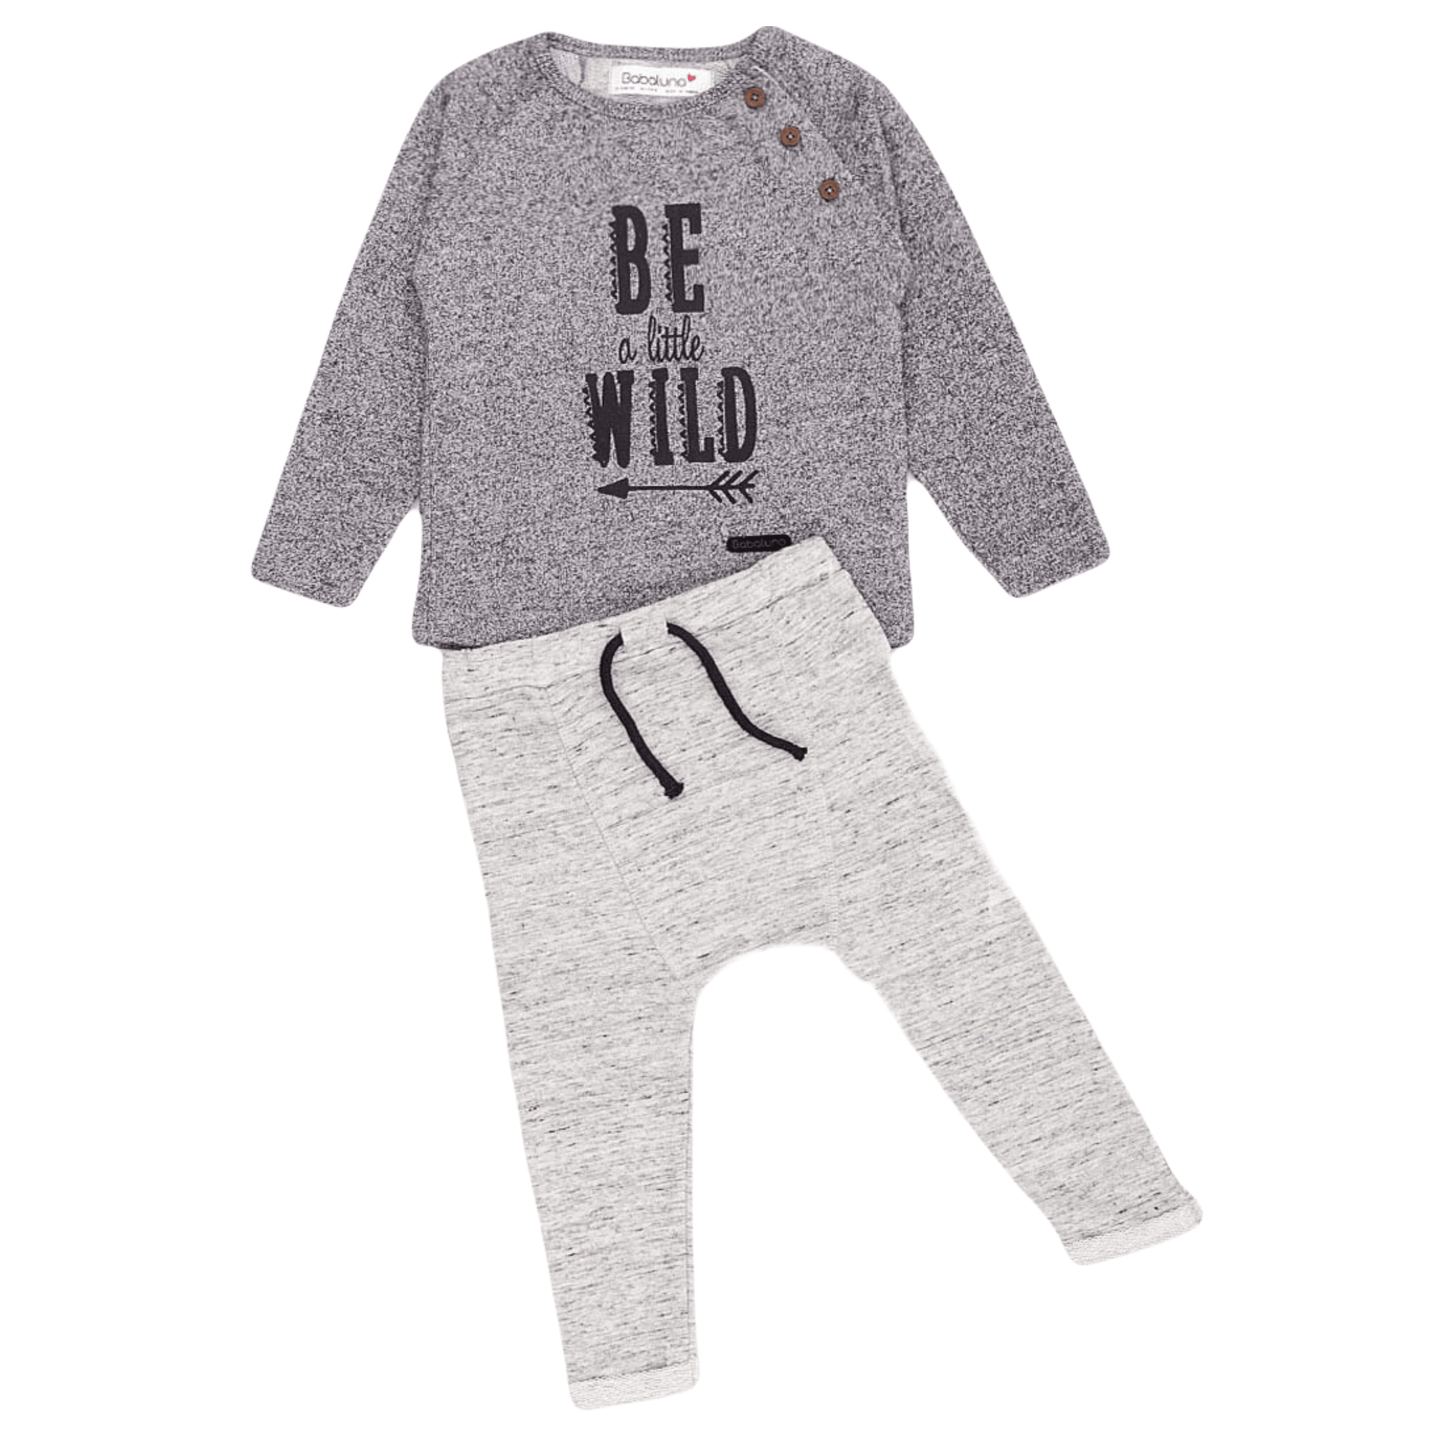 Baby Boys Wild Outfit | Oscar & Me | Baby & Children’s Clothing & Accessories